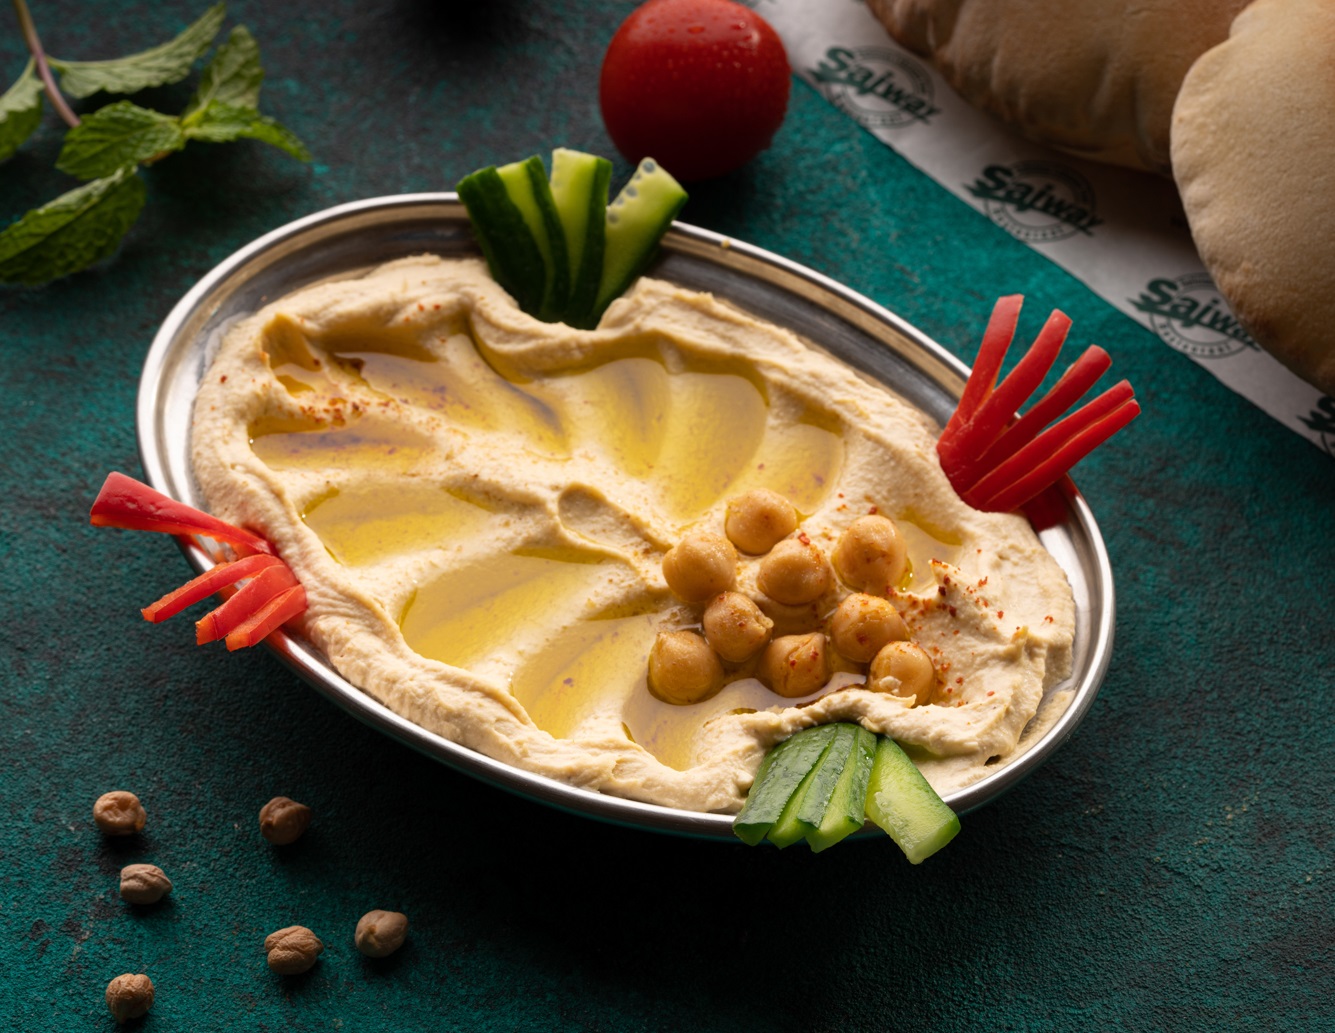 Enjoy the Deliciously Creamy and Best Hommos in Abu Dhabi